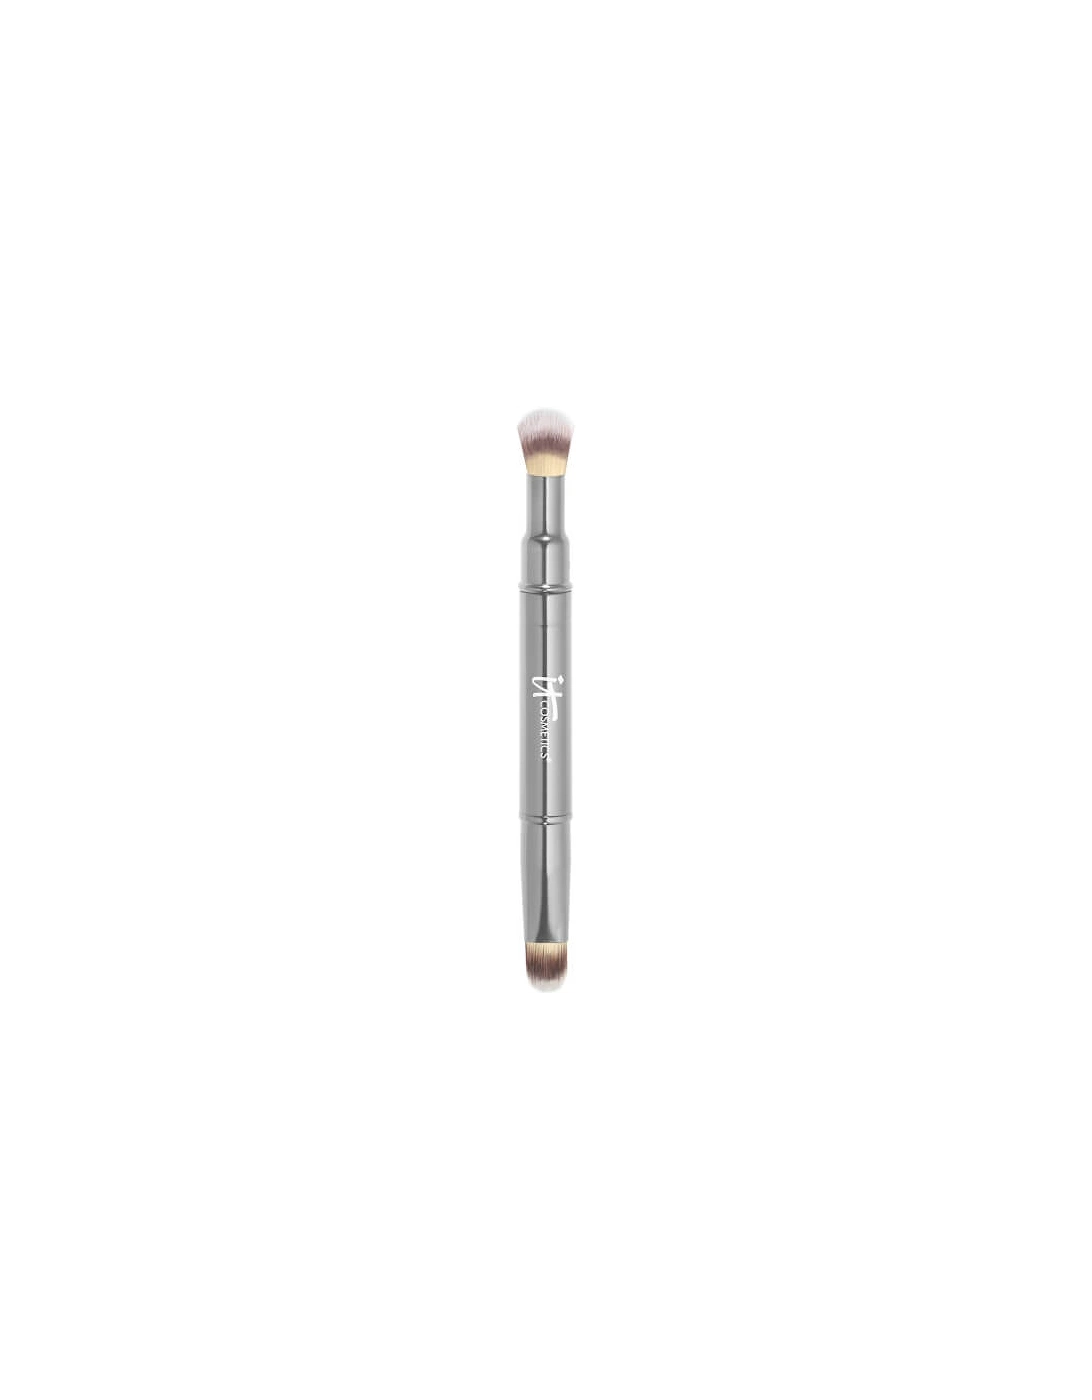 Heavenly Luxe Dual Airbrush Concealer Brush #2, 2 of 1